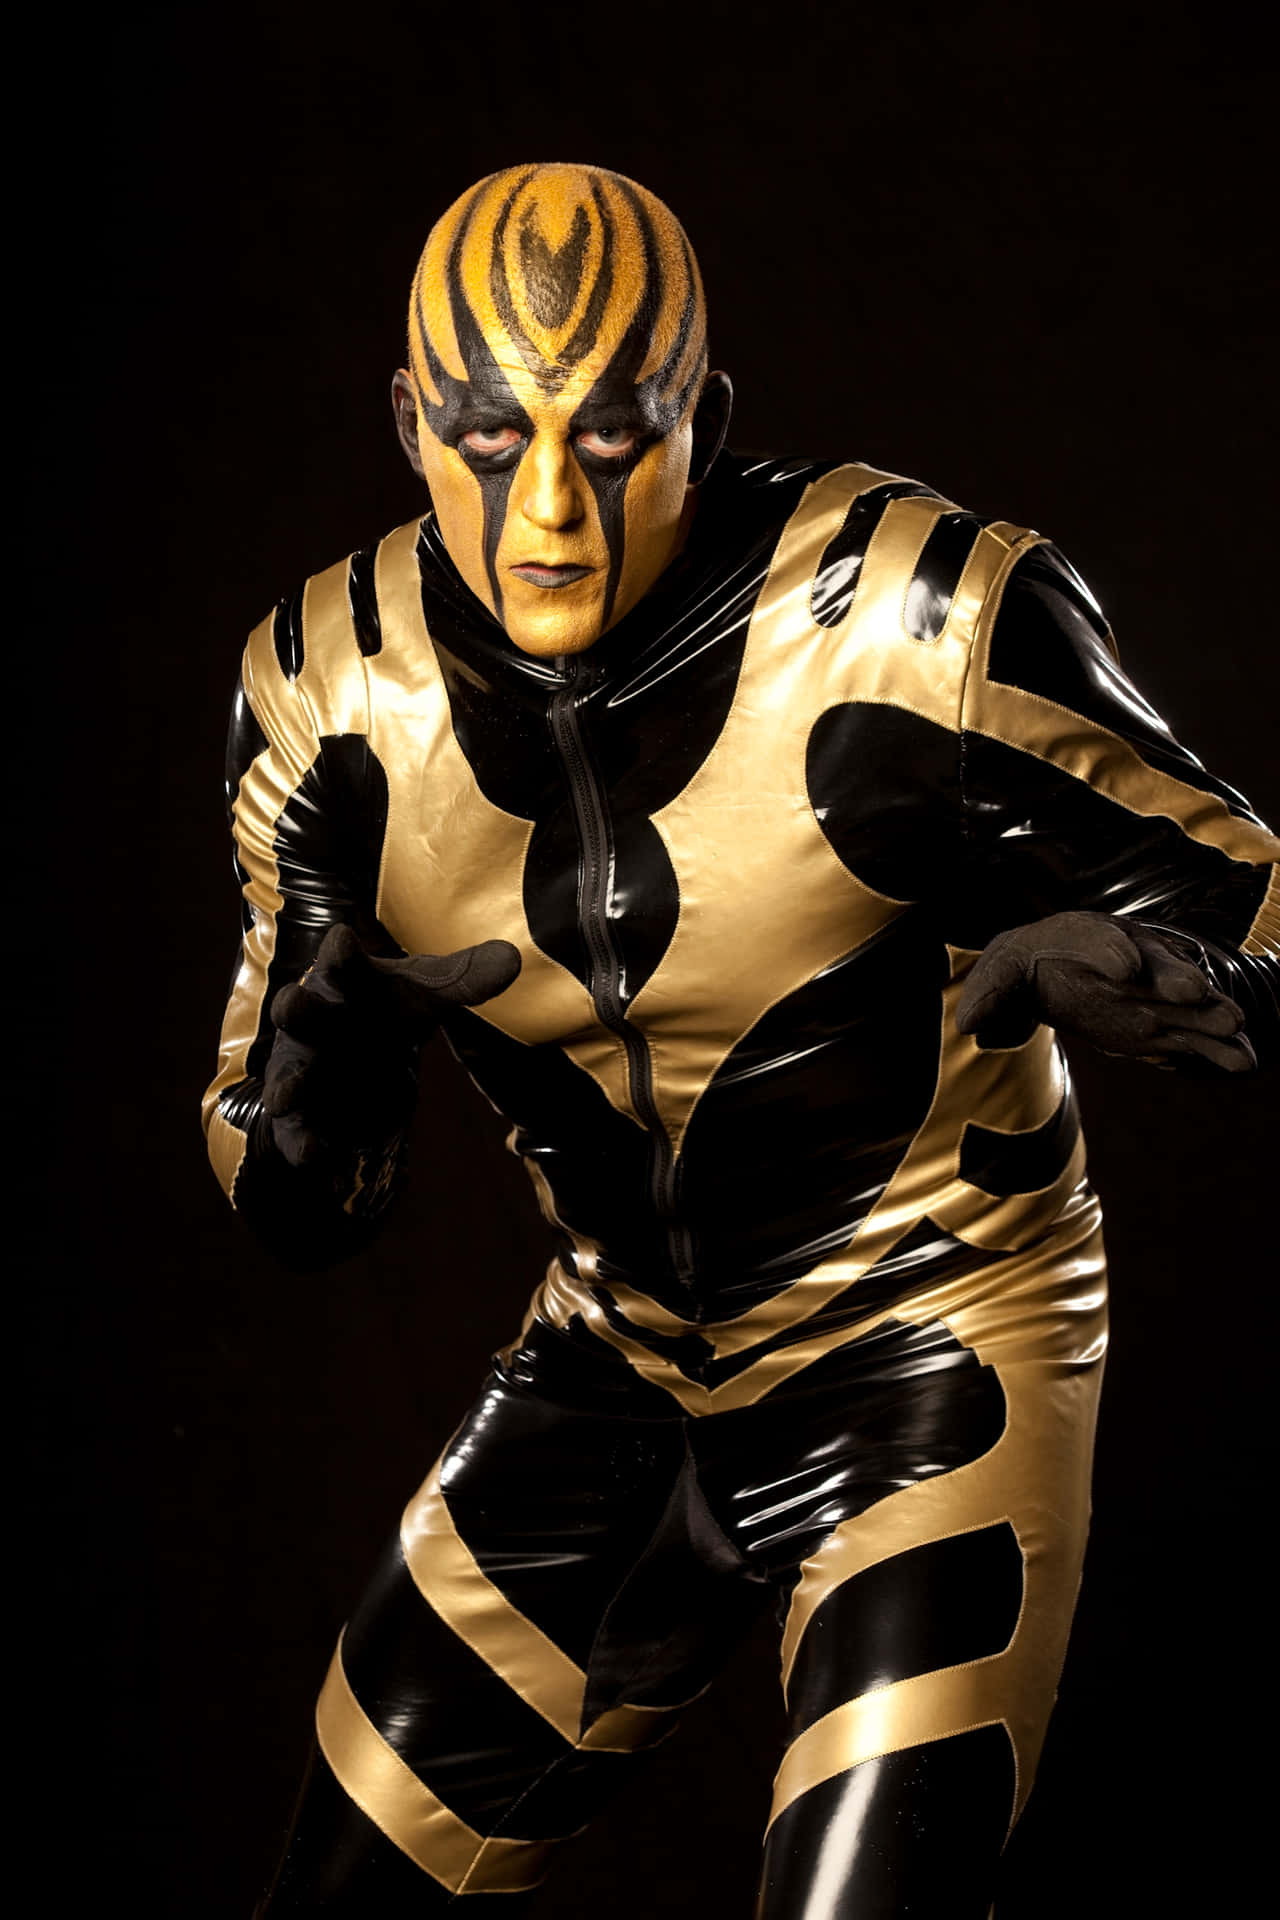 Dustin Rhodes Wearing his Iconic Goldust Outfit Wallpaper